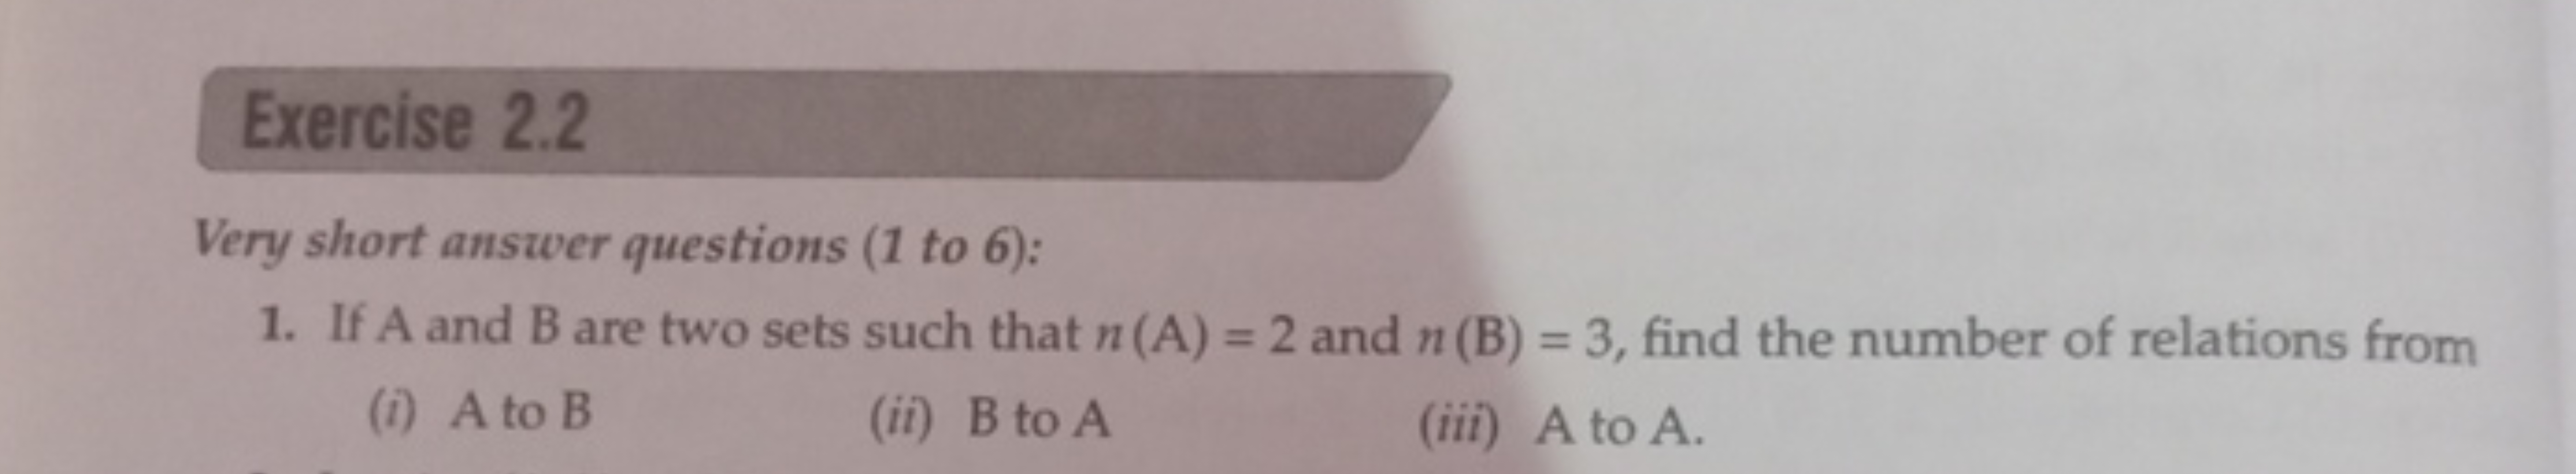 Exercise 2.2
Very short answer questions (1 to 6):
1. If A and B are t